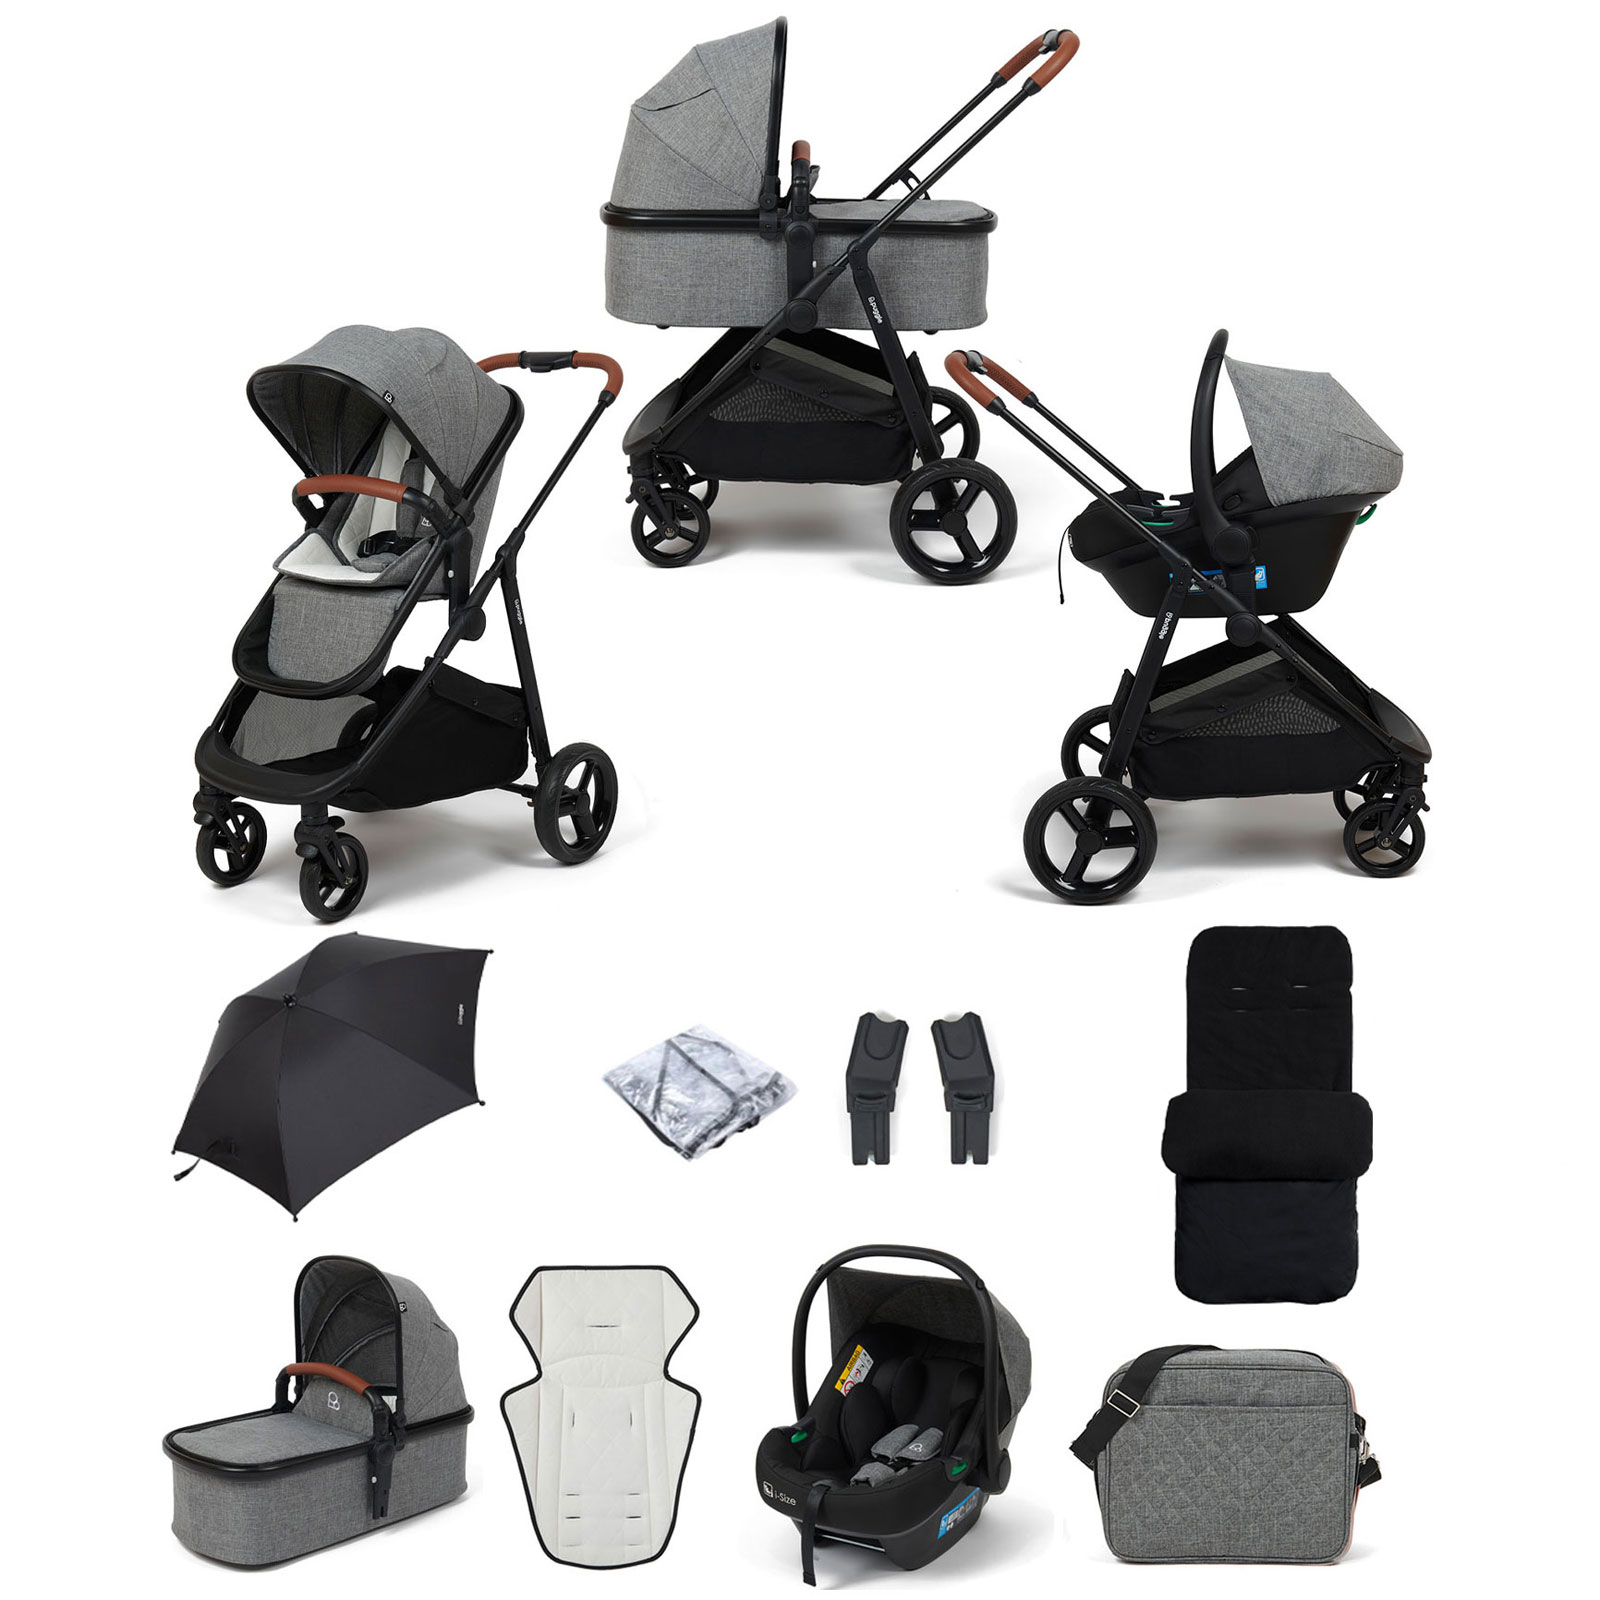 Puggle Monaco XT 3in1 i-Size Travel System with Changing Bag, Parasol & Deluxe Footmuff - Graphite Grey